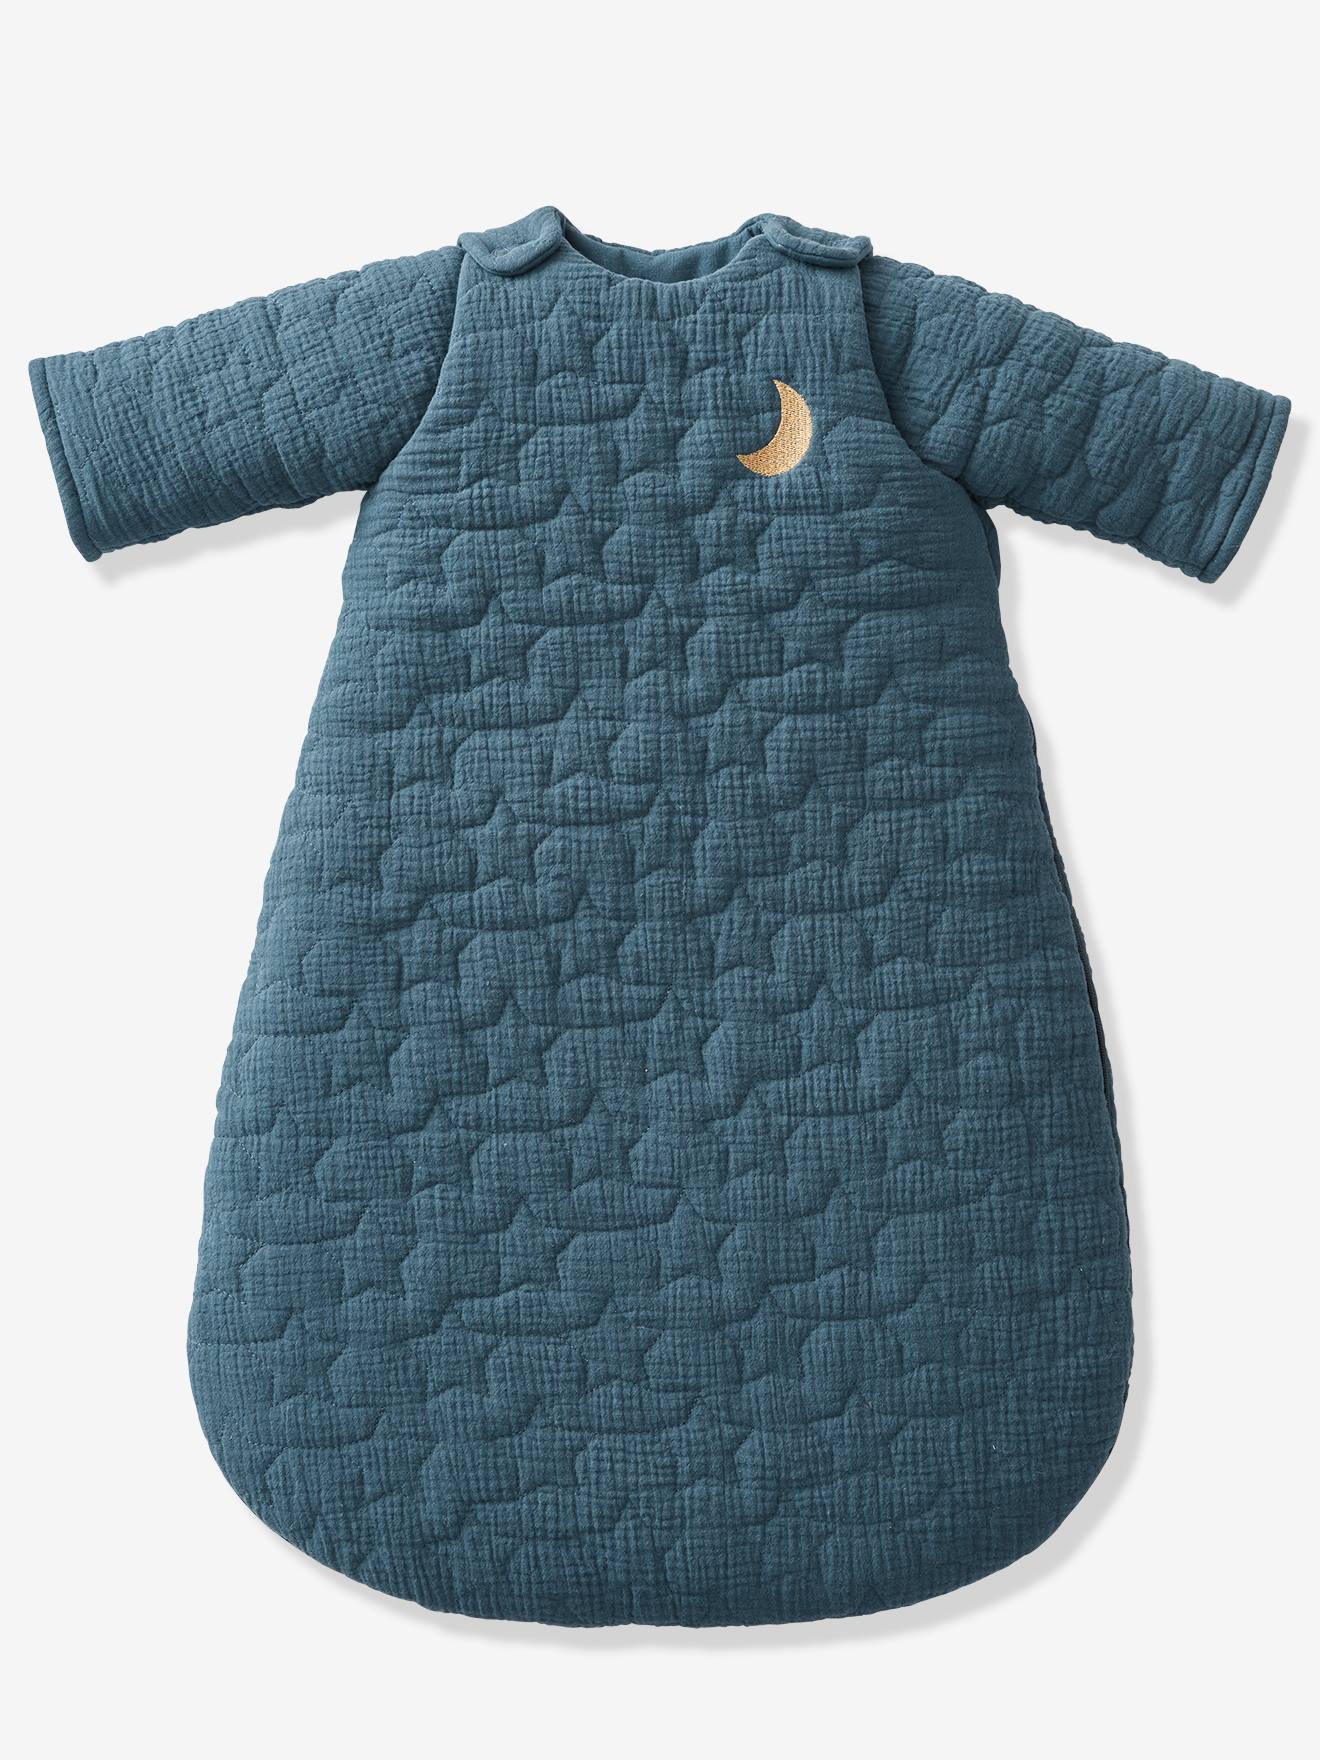 Quilted Baby Sleep Bag with Removable Sleeves in Organic Cotton* Gauze,  Dream Nights - dark blue